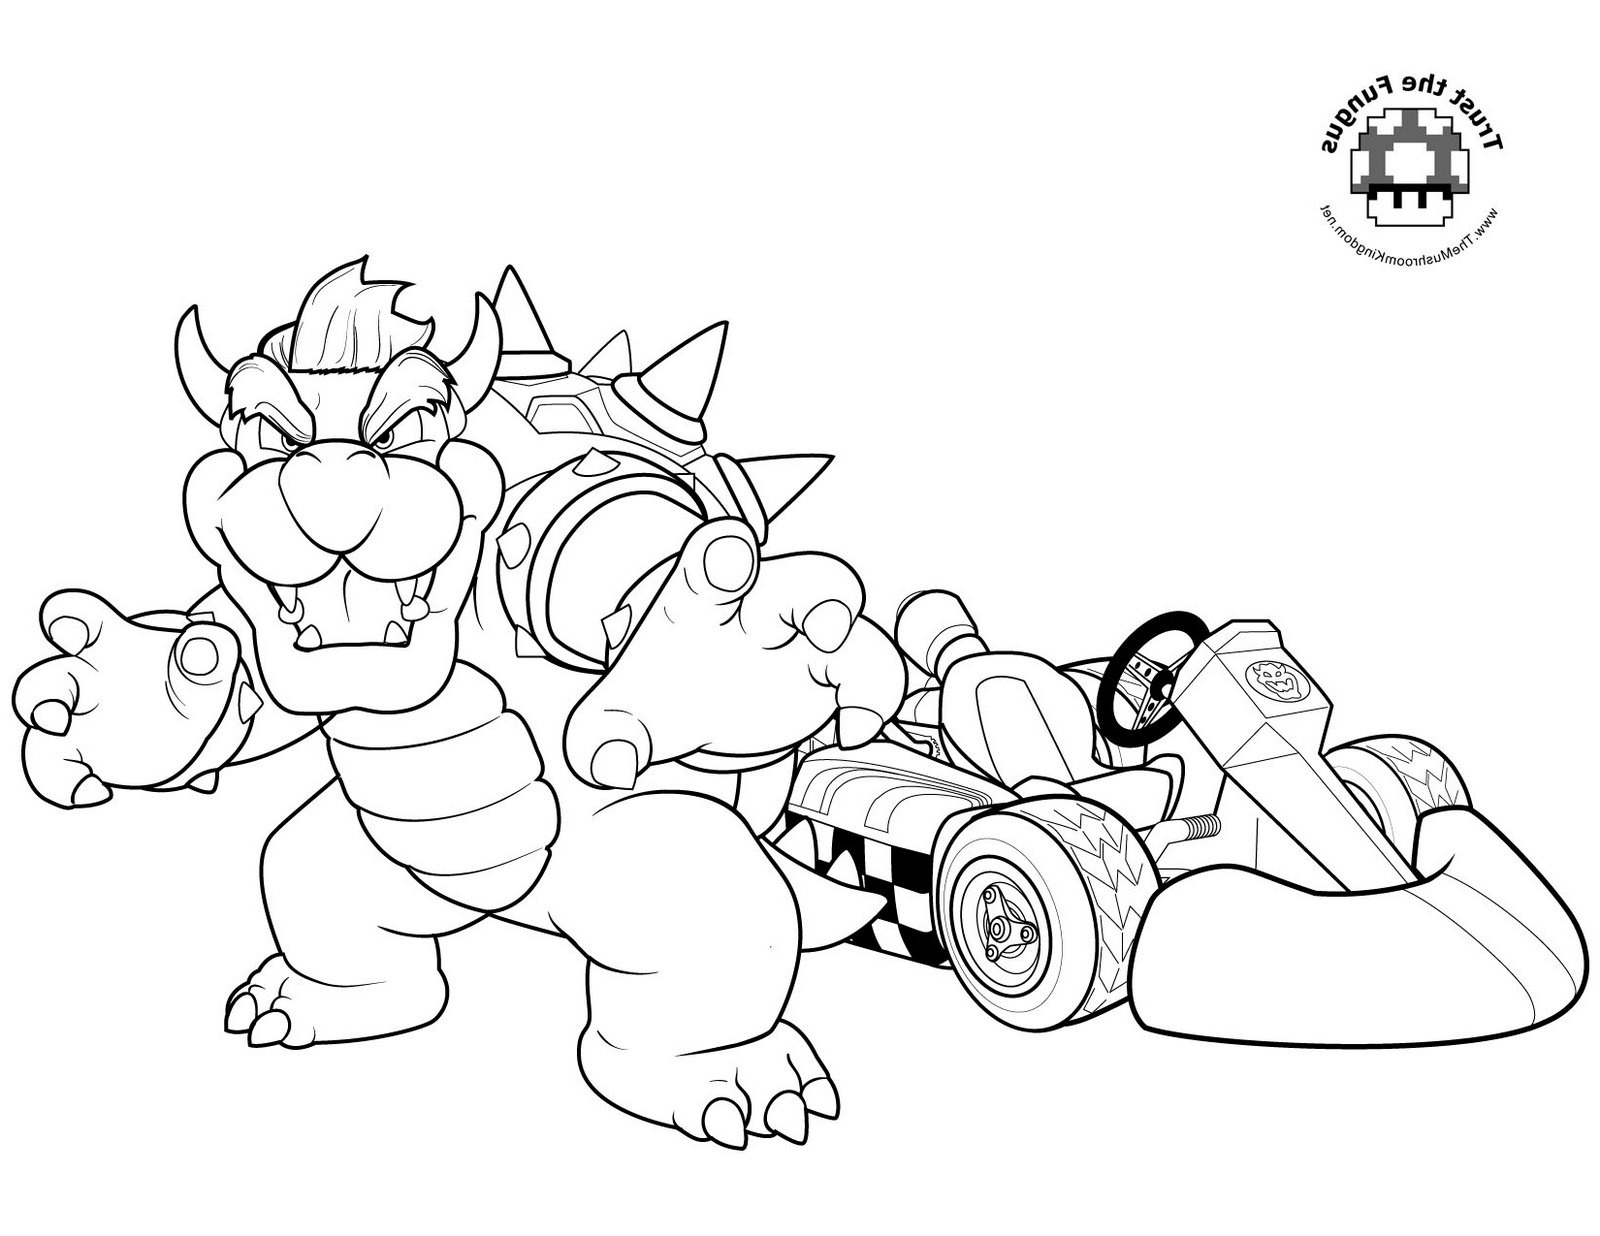 Coloriage Bowser Nice Mario Coloring Pages Black and White Super Mario